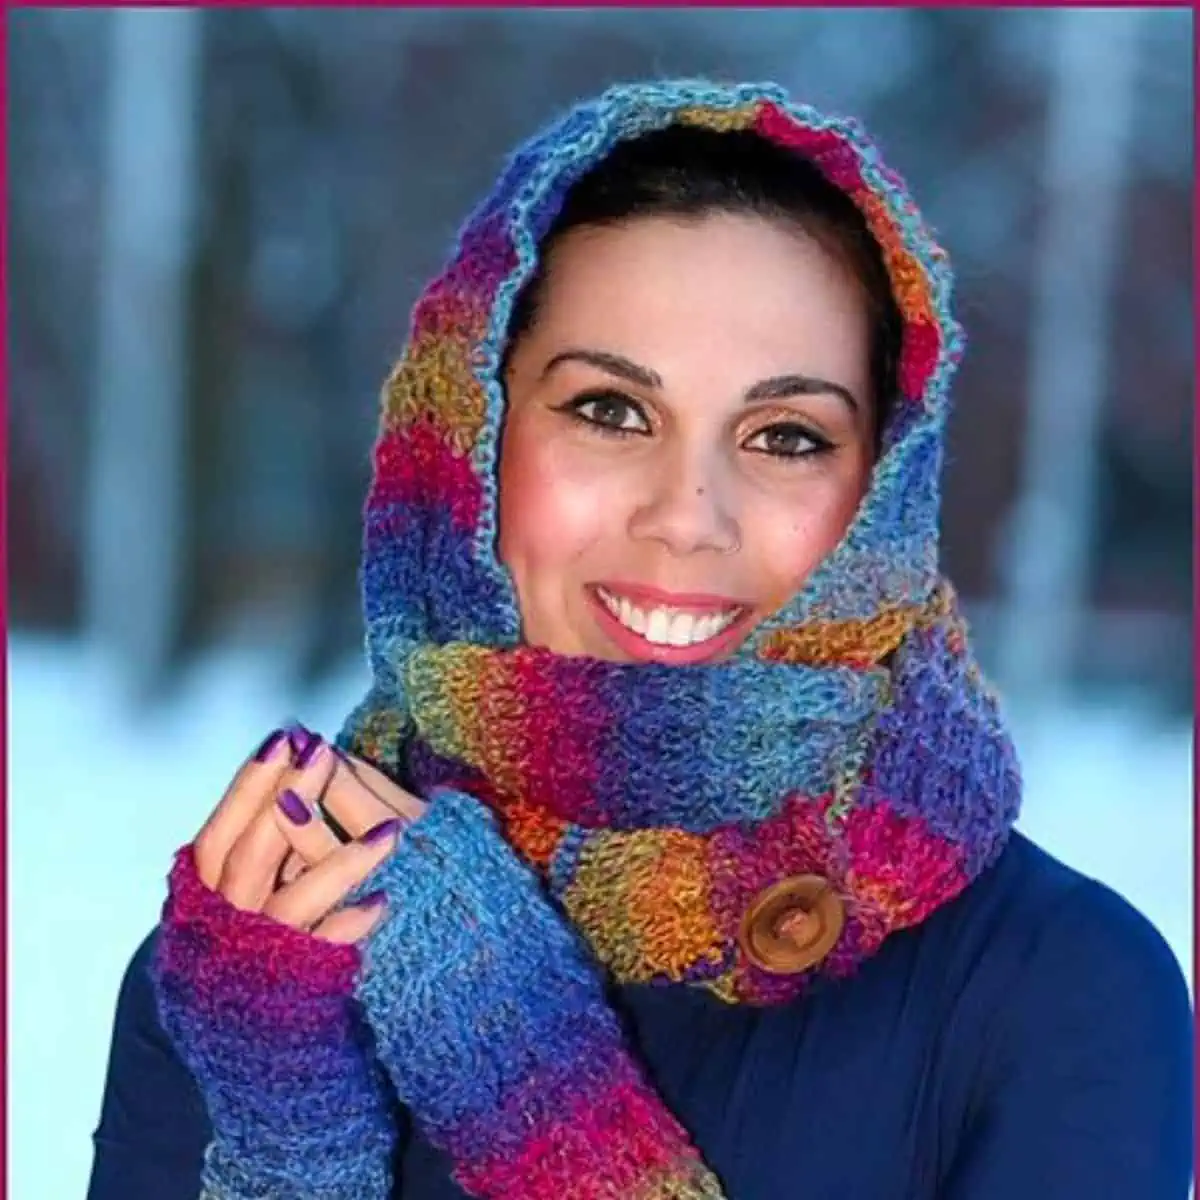 woman wearing colorful arm warmers and a cowl